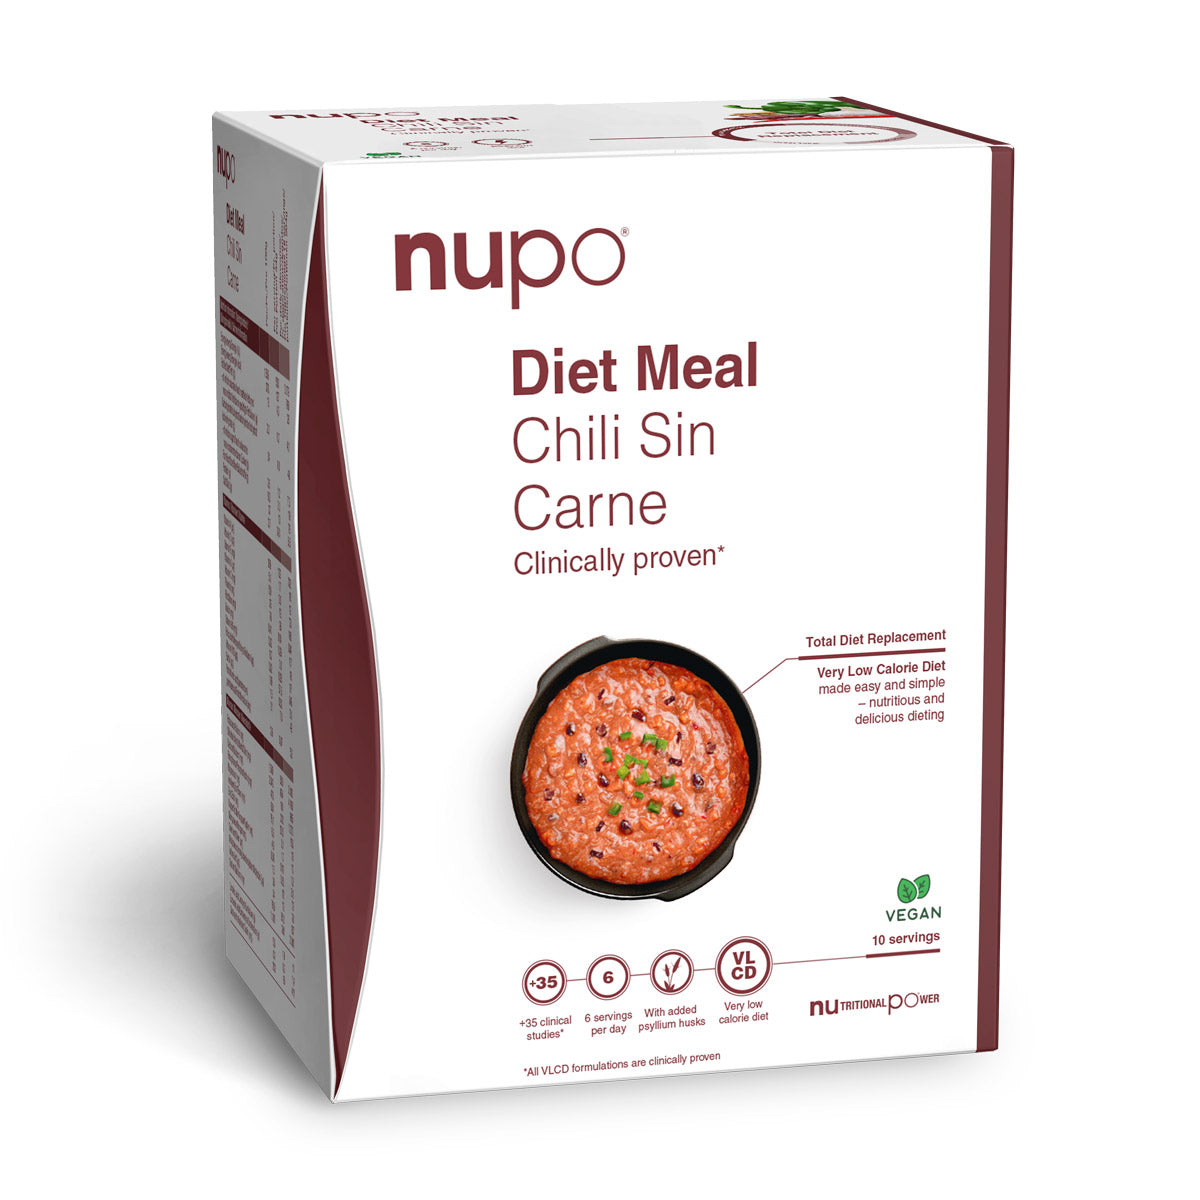 Se Nupo Diet Meal (340g) - Chili Sin Carne hos Muscle House